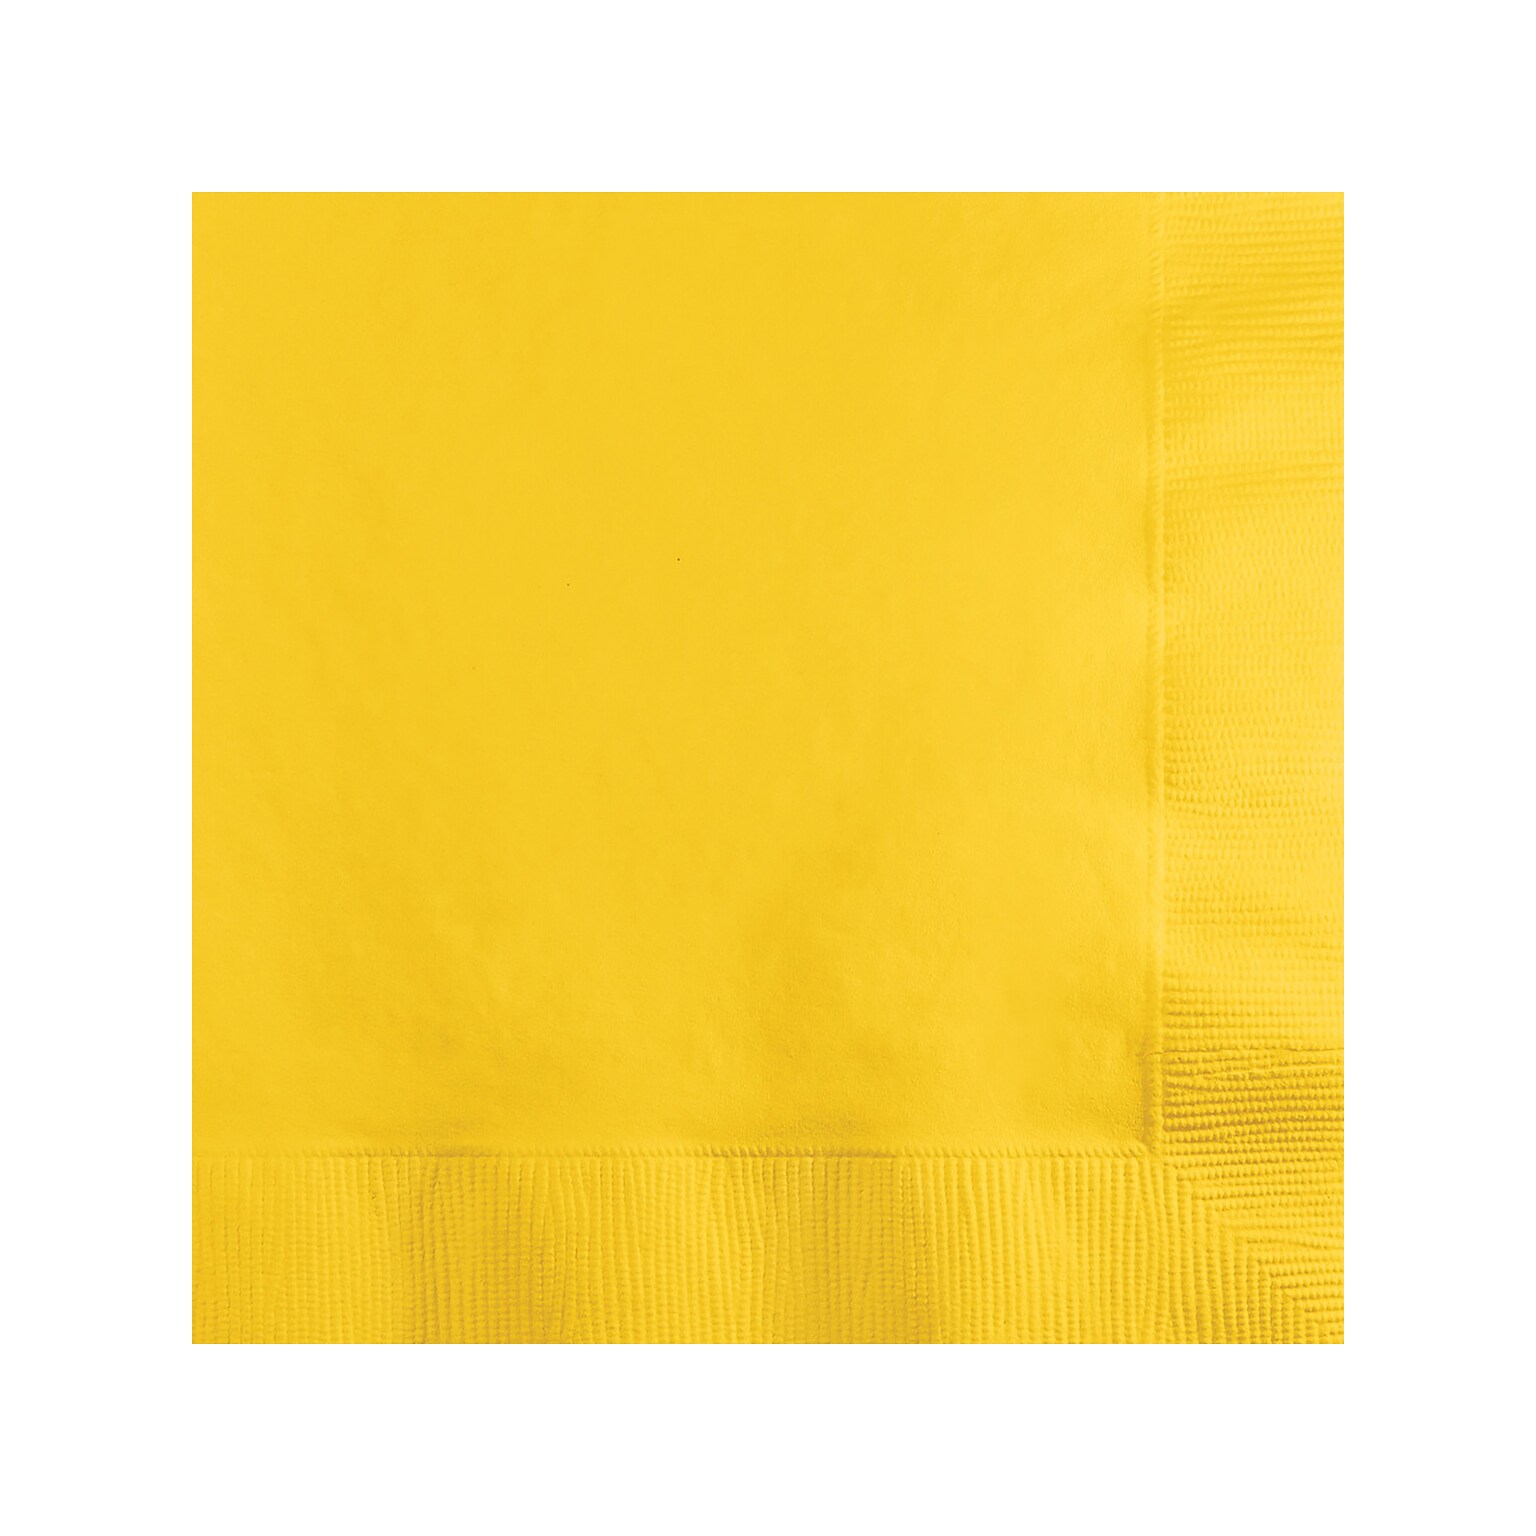 Creative Converting Touch of Color Beverage Napkin, 2-ply, School Bus Yellow, 150 Napkins/Pack (DTC801021BBNAP)